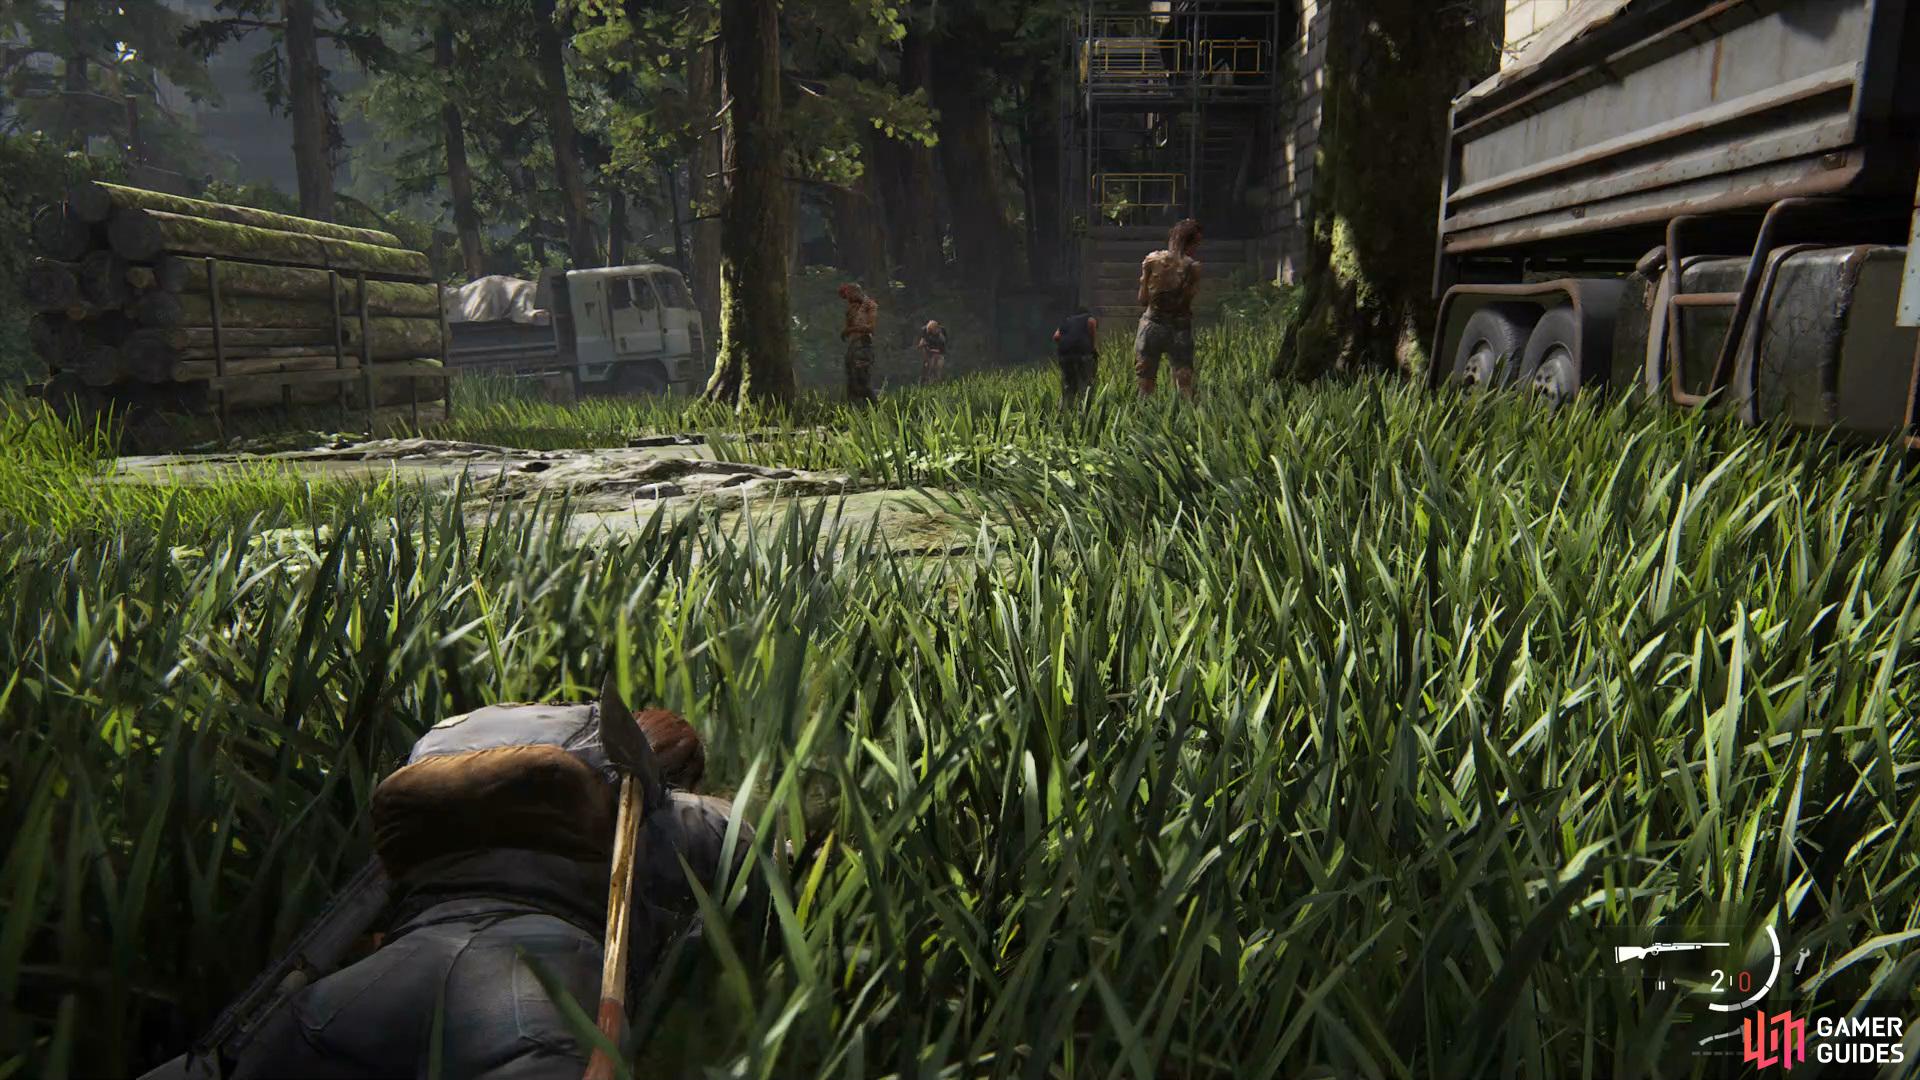 Once you've made it to the Dome via the fence, crawl through the grass to stealth takedown the enemies 